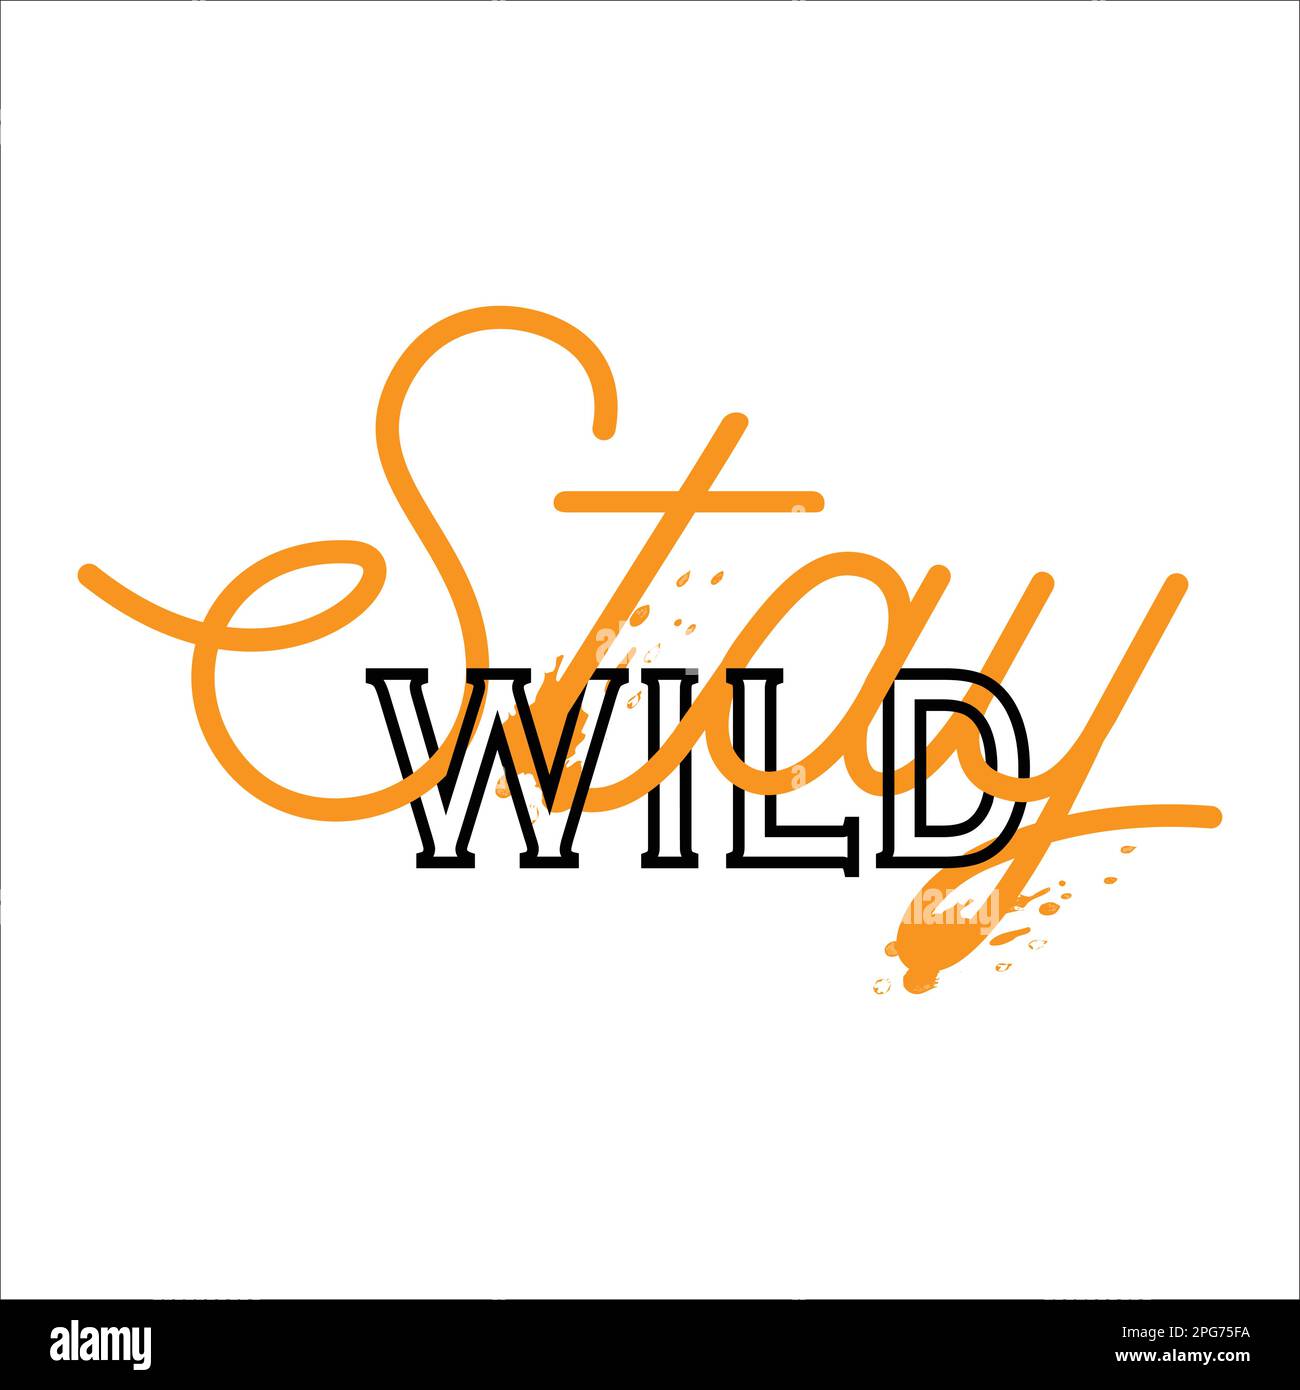 Stay Wild typographic design with Modern, simple, minimal style. Stay wild Great lettering and calligraphy for greeting cards, stickers, banners. Stock Vector